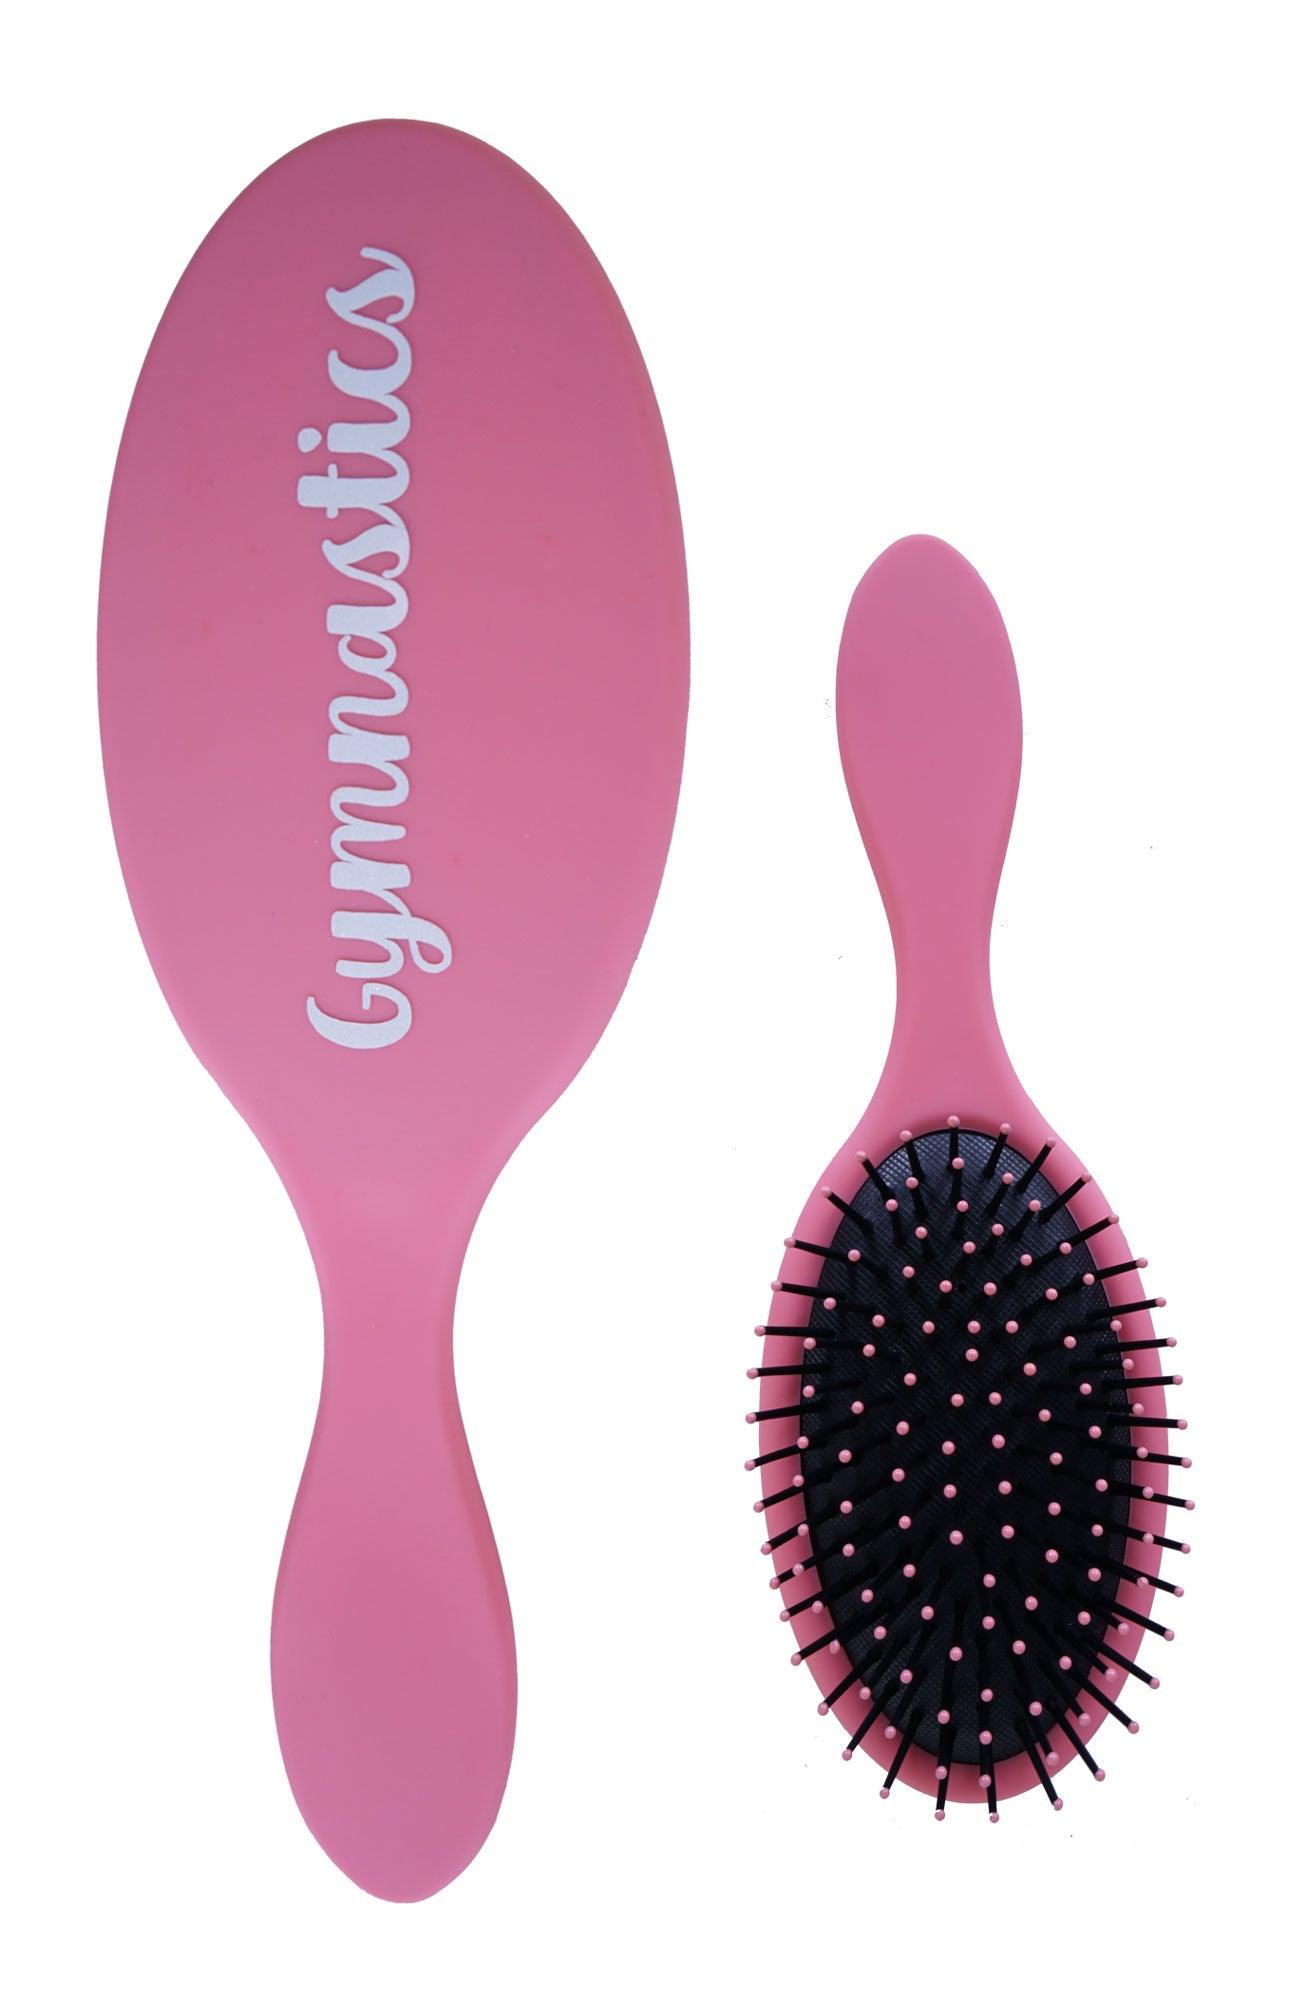 Hairbrush with own name